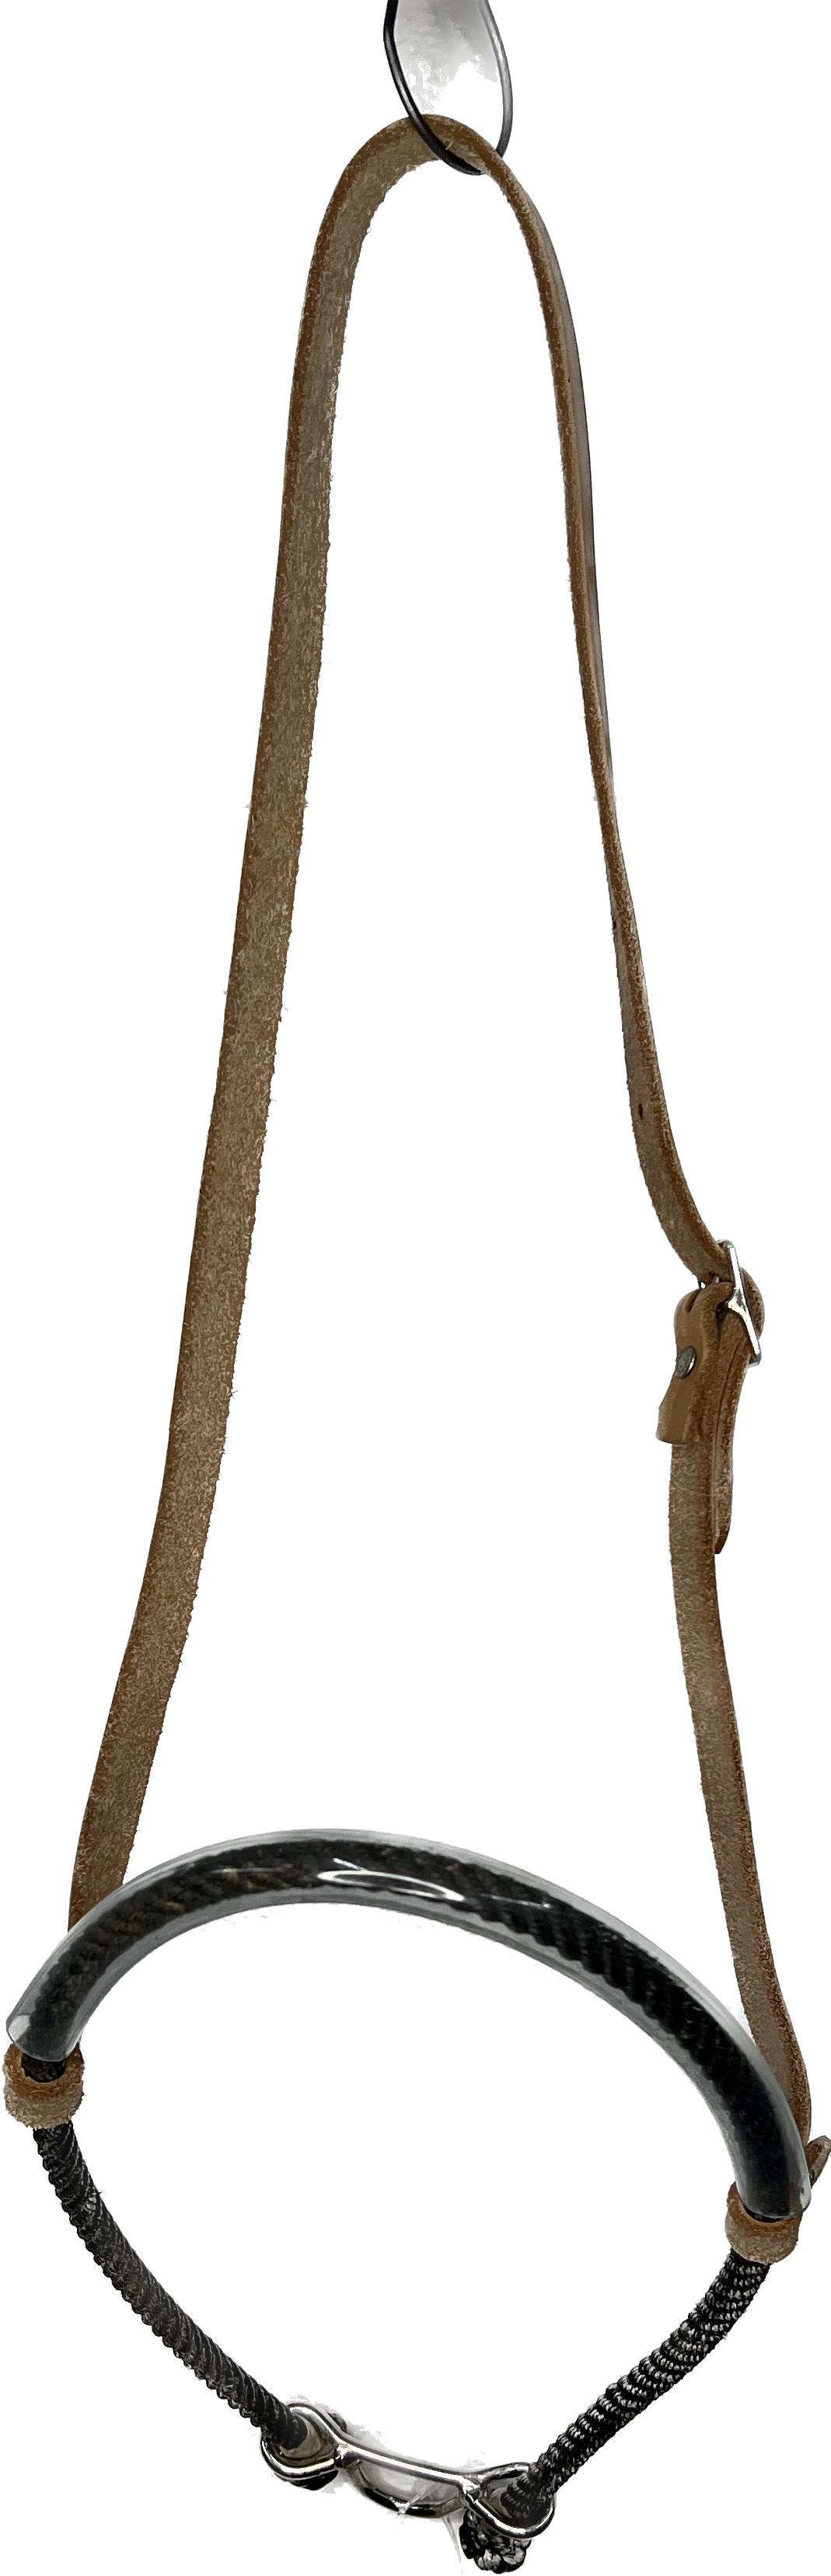 Noseband, Lariat with Tubing covered Nose